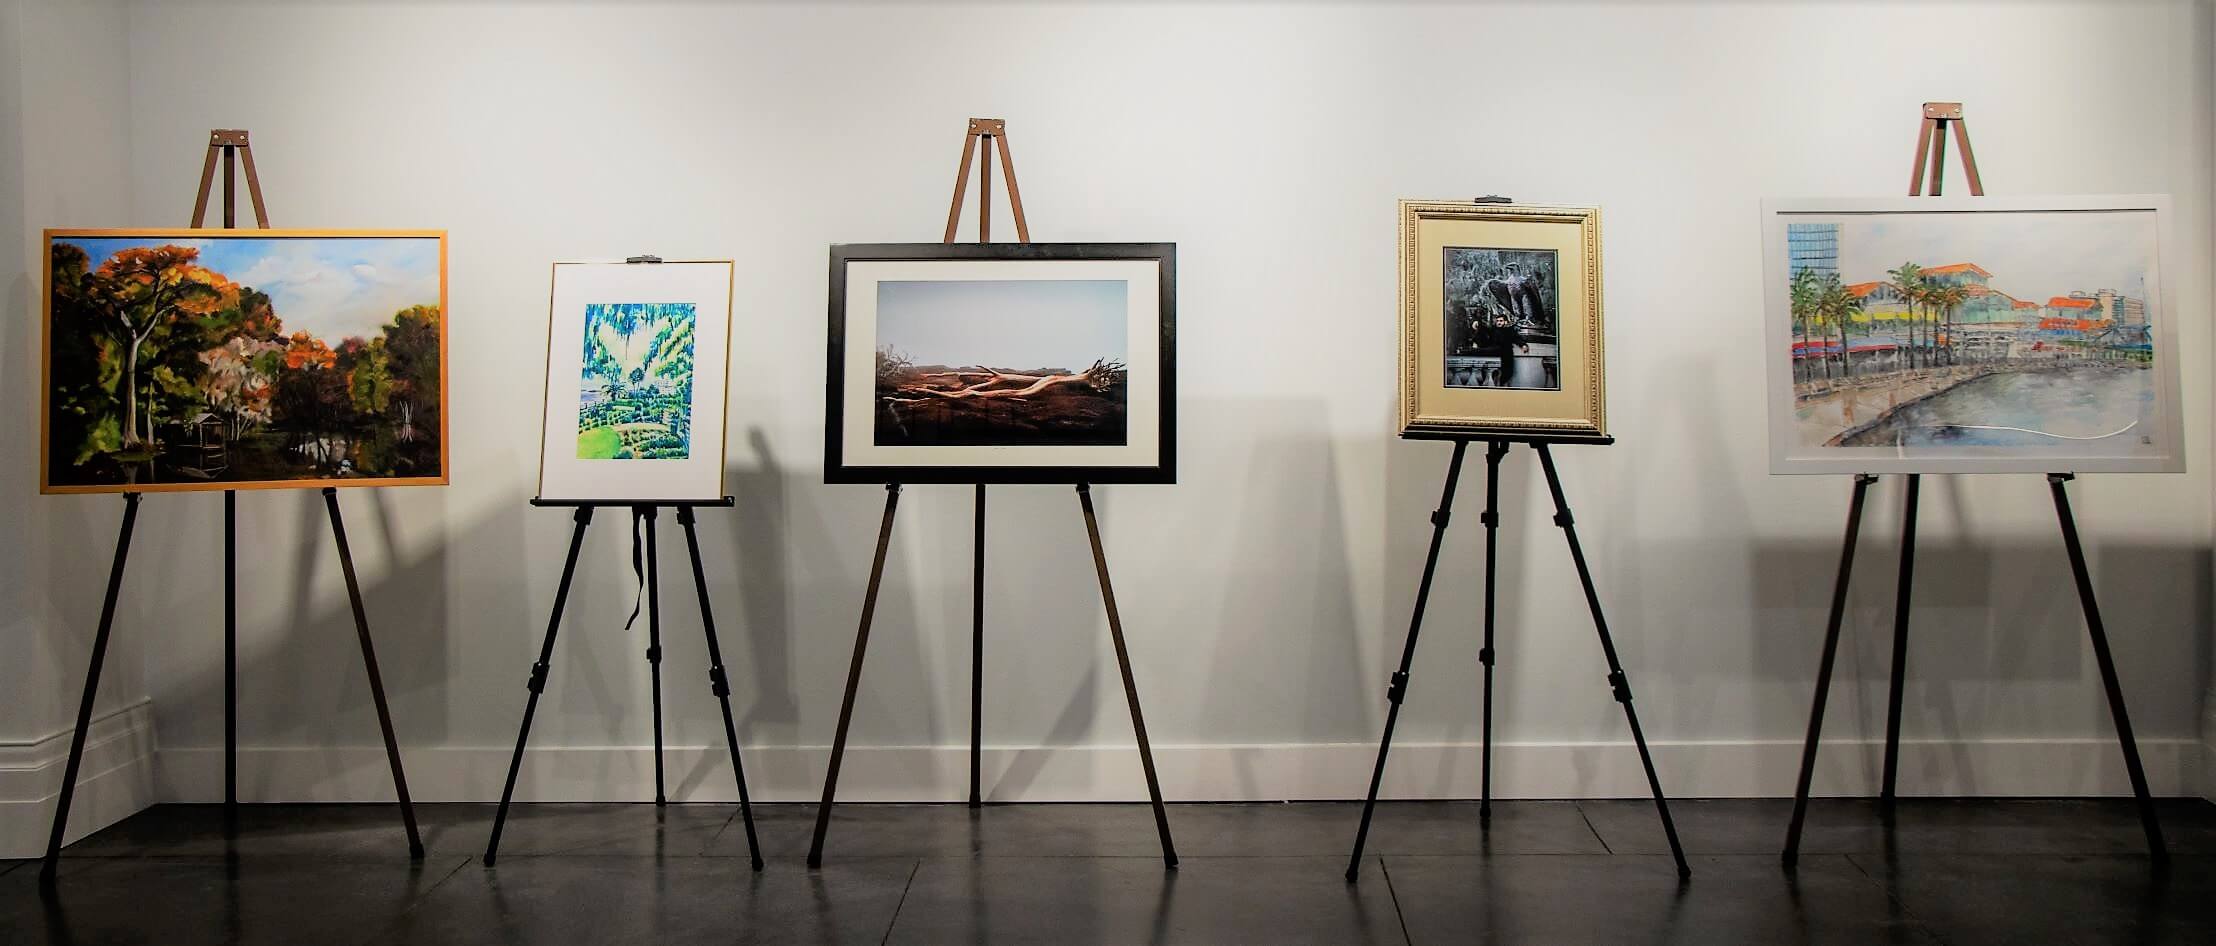 Five pieces of artwork, displayed on easels